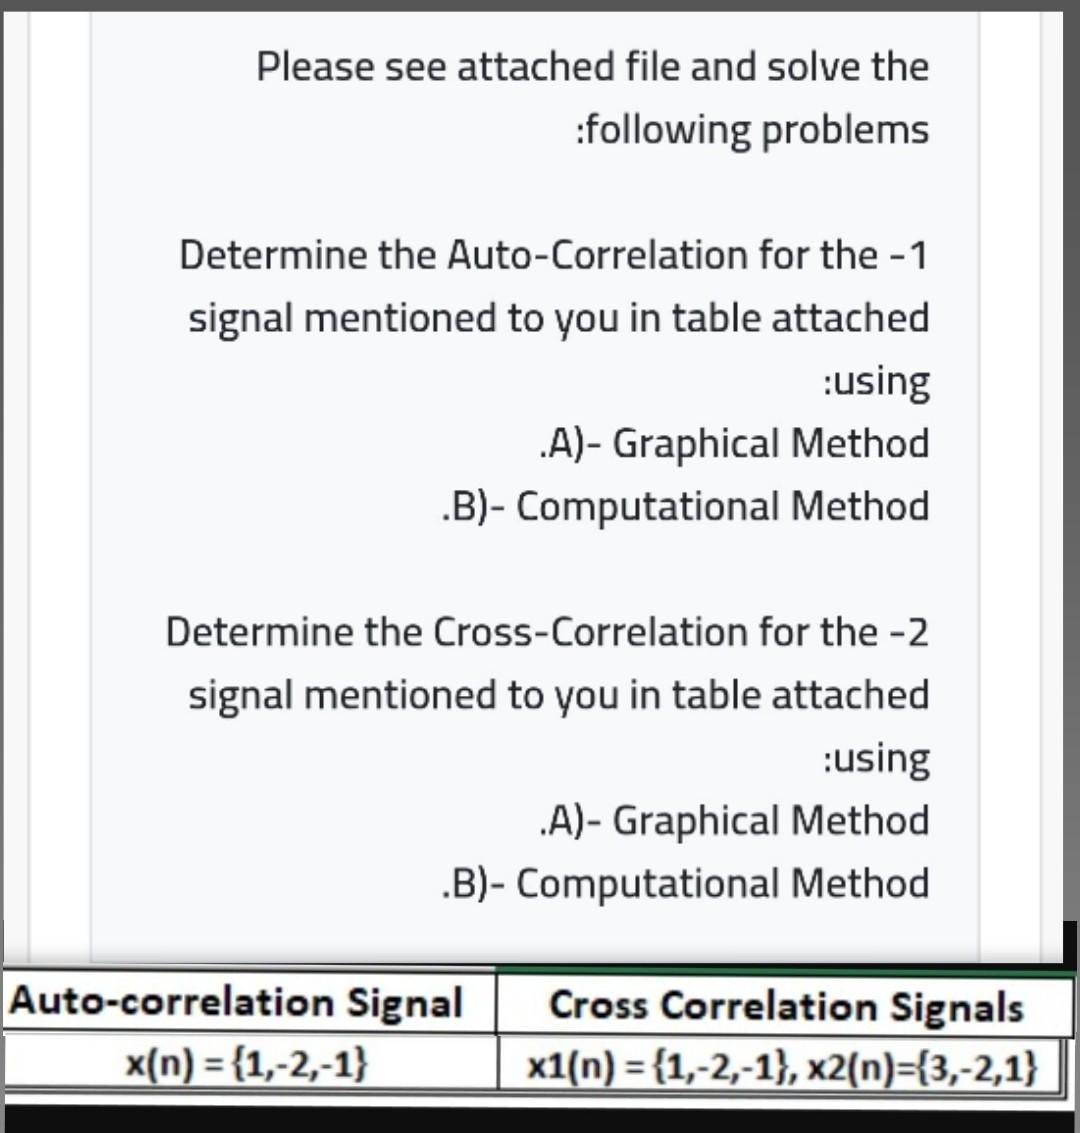 Use of cross-correlation techniques for determining the